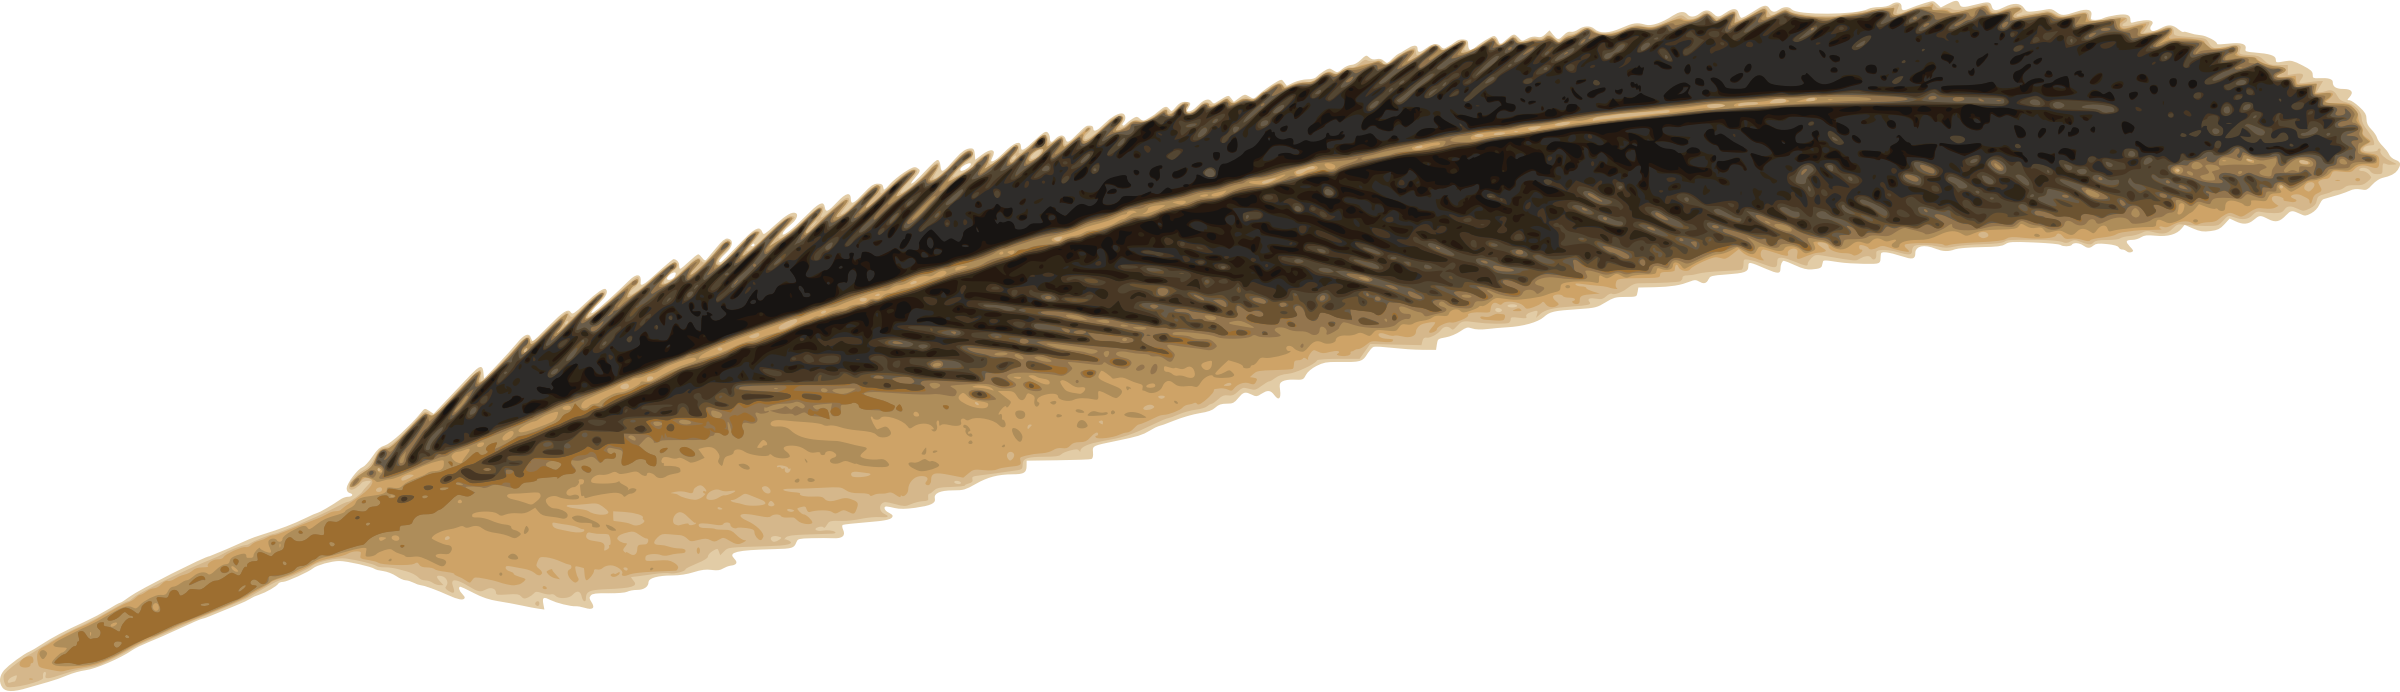 feather clipart brown